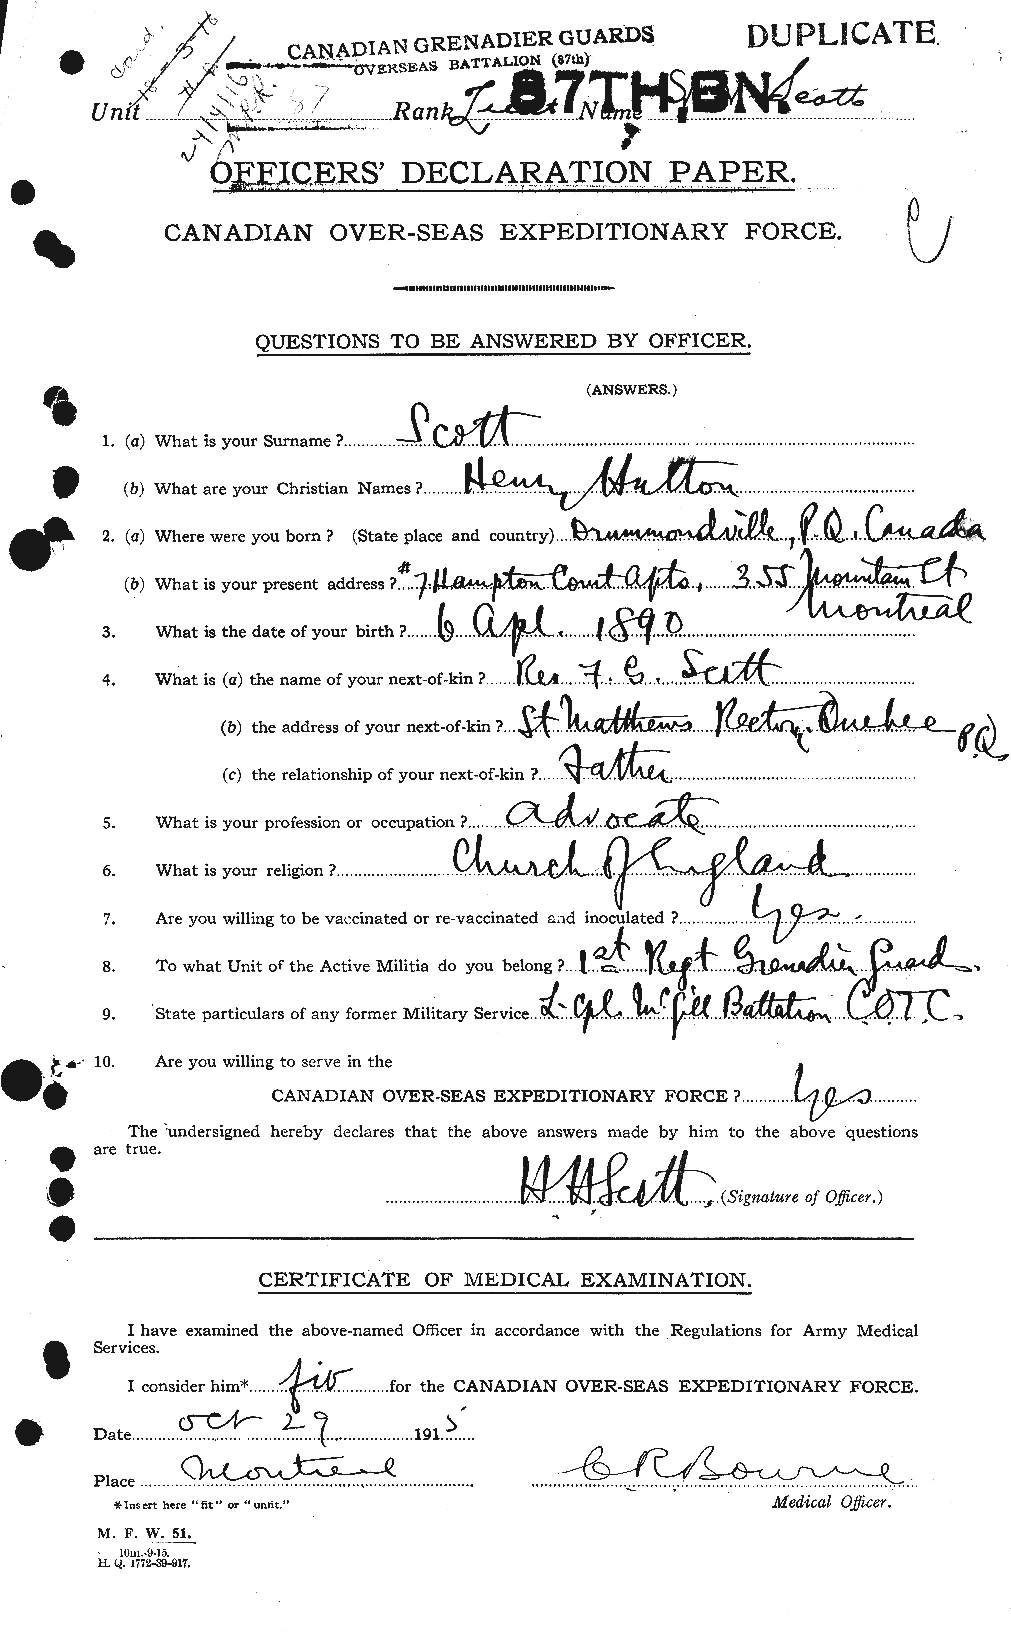 Personnel Records of the First World War - CEF 086054a